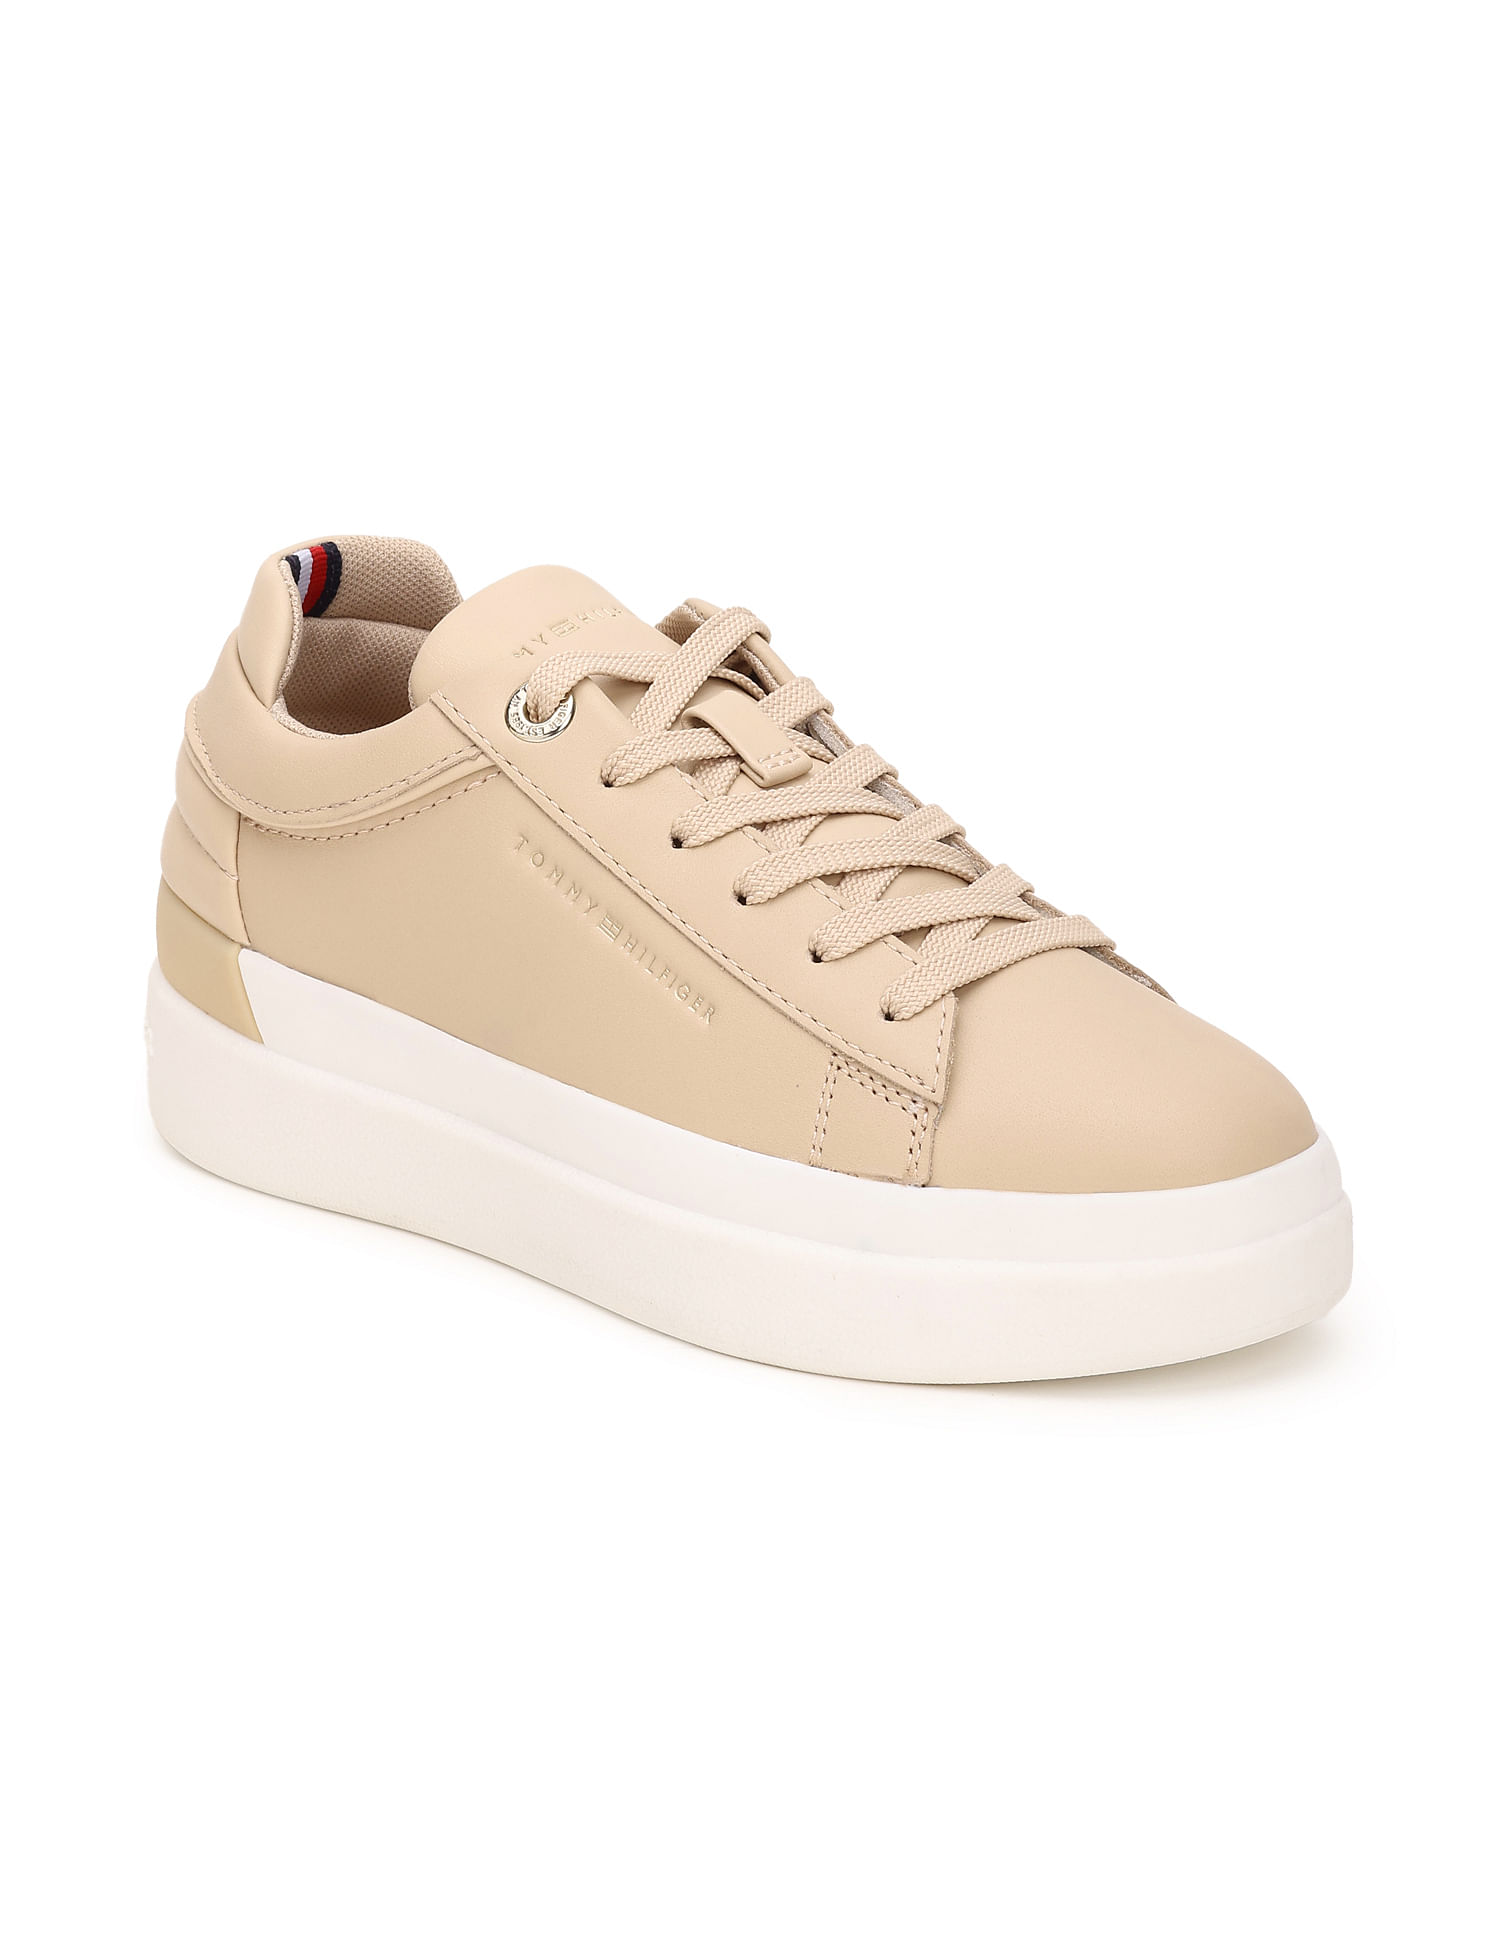 Buy Tommy Hilfiger Colour Block Elevated Leather Sneakers | Sneaker high